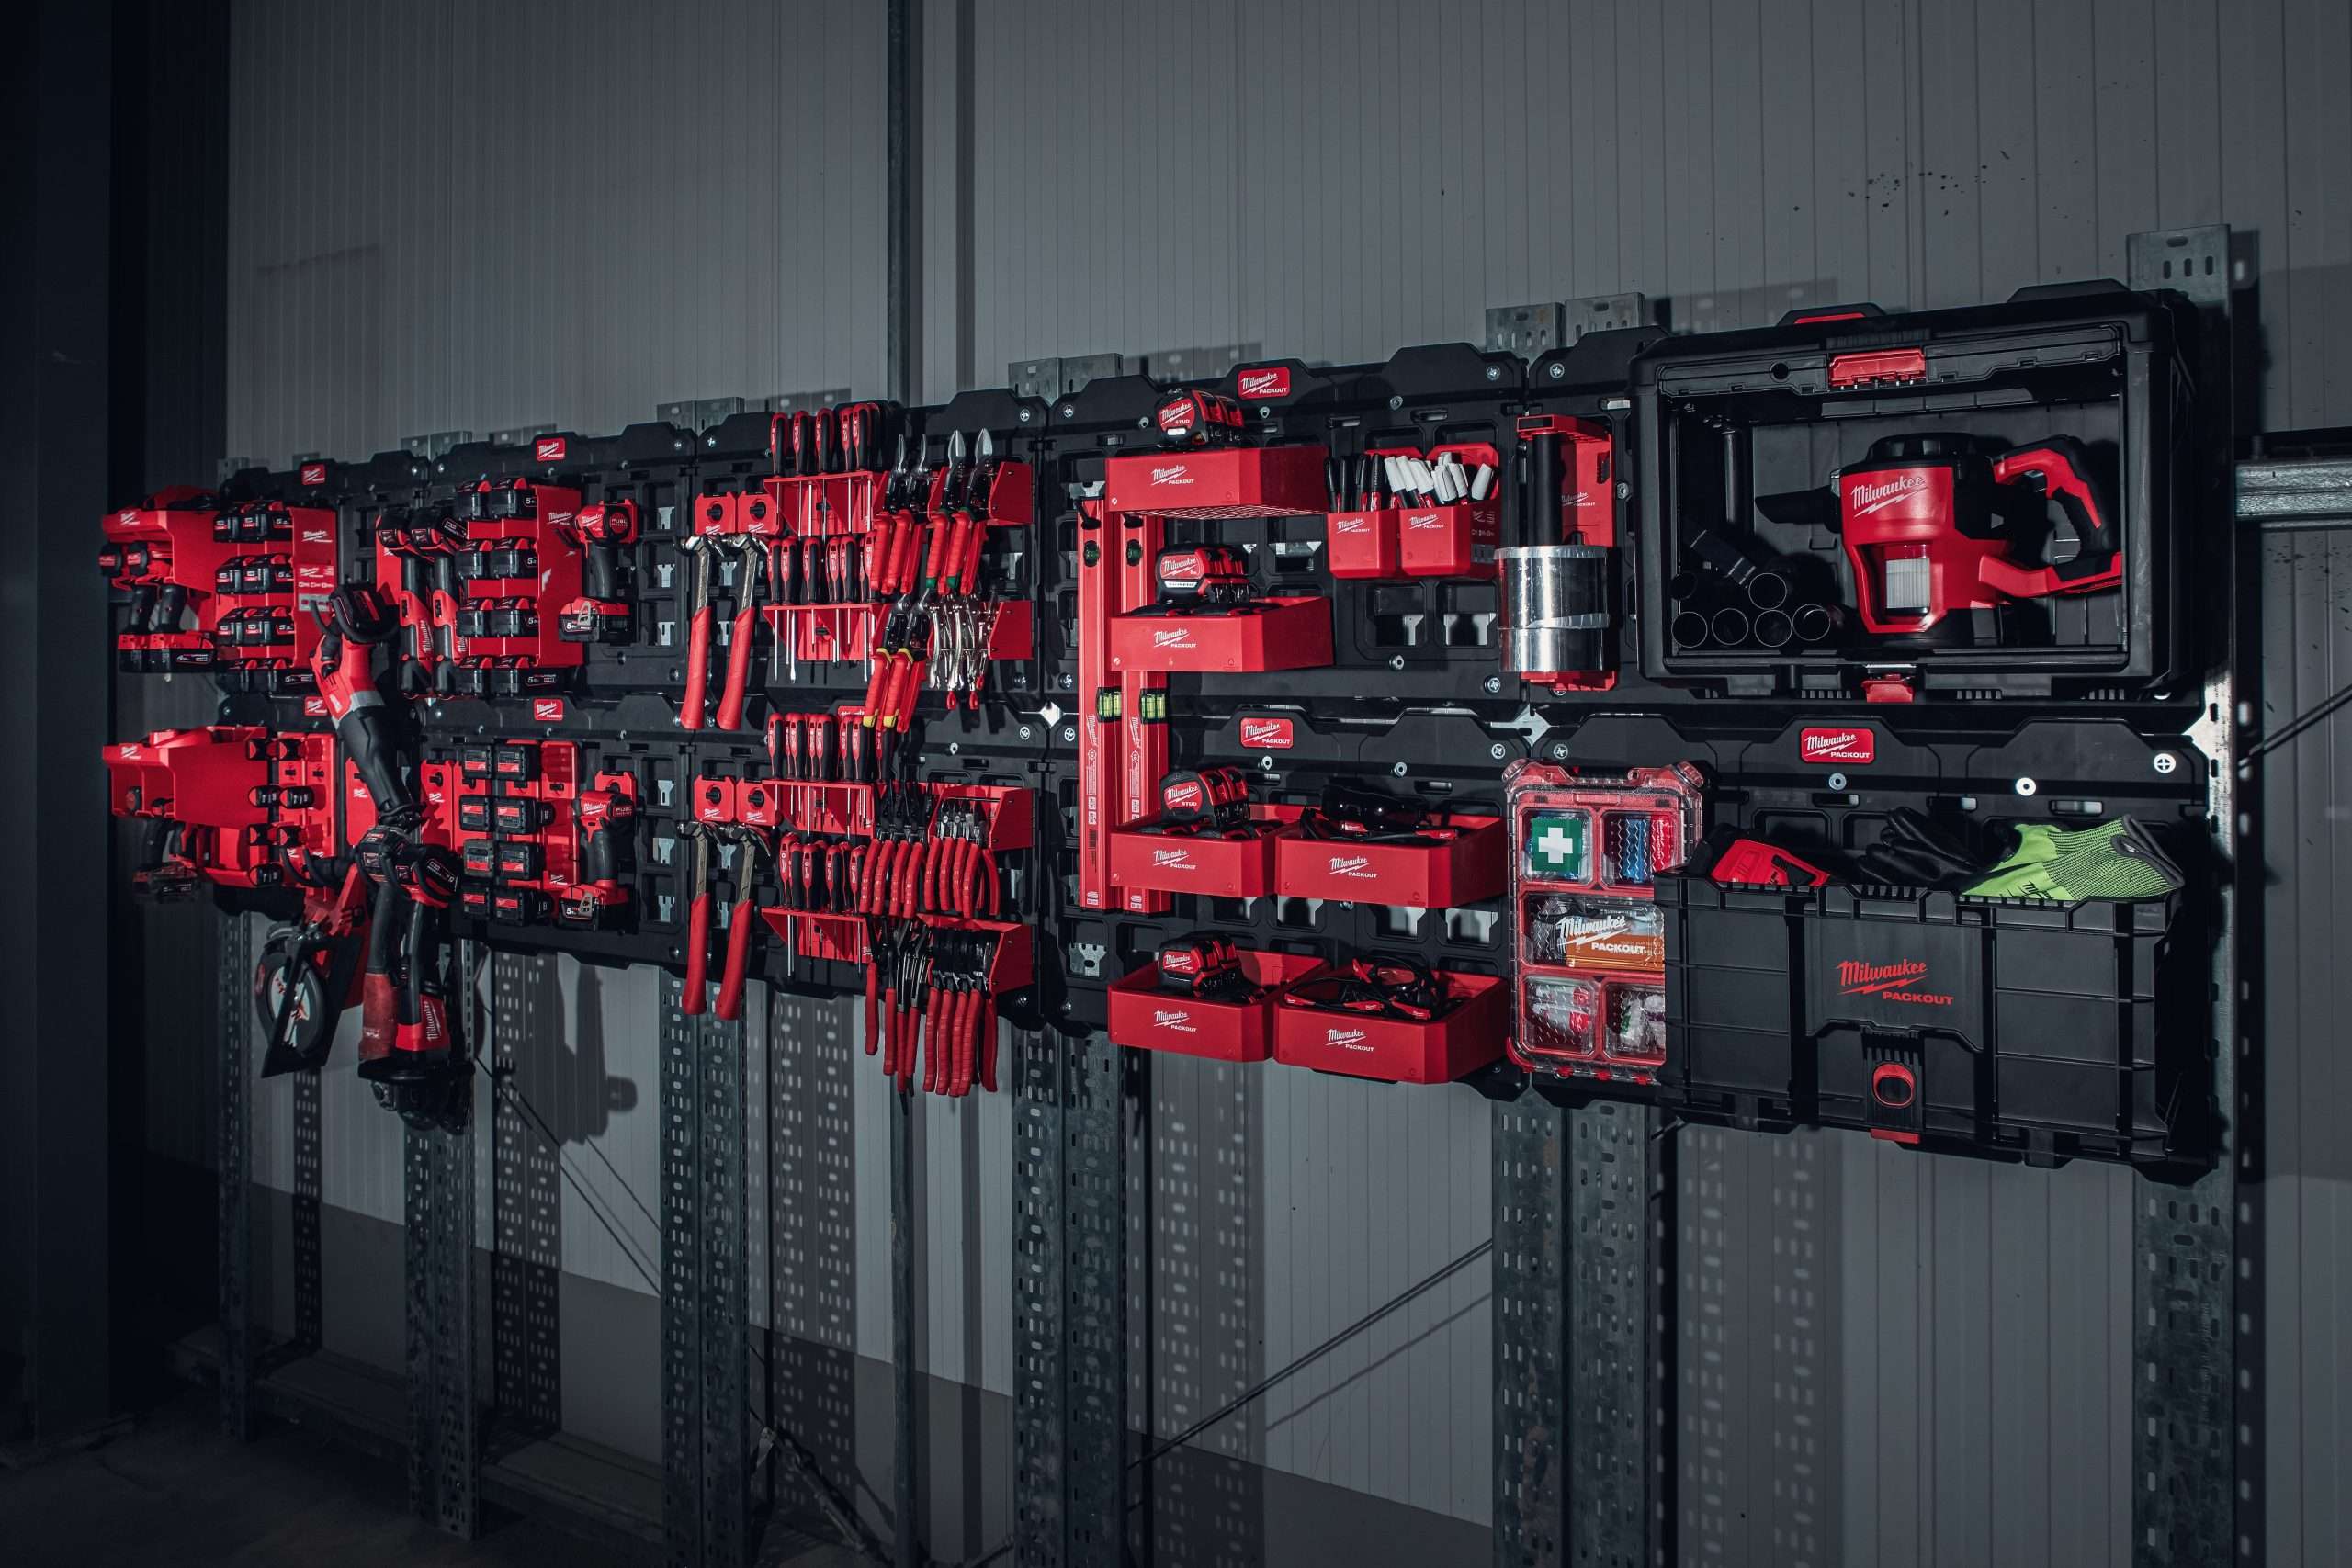 An image of Milwaukee Tools Available for purchase or hire